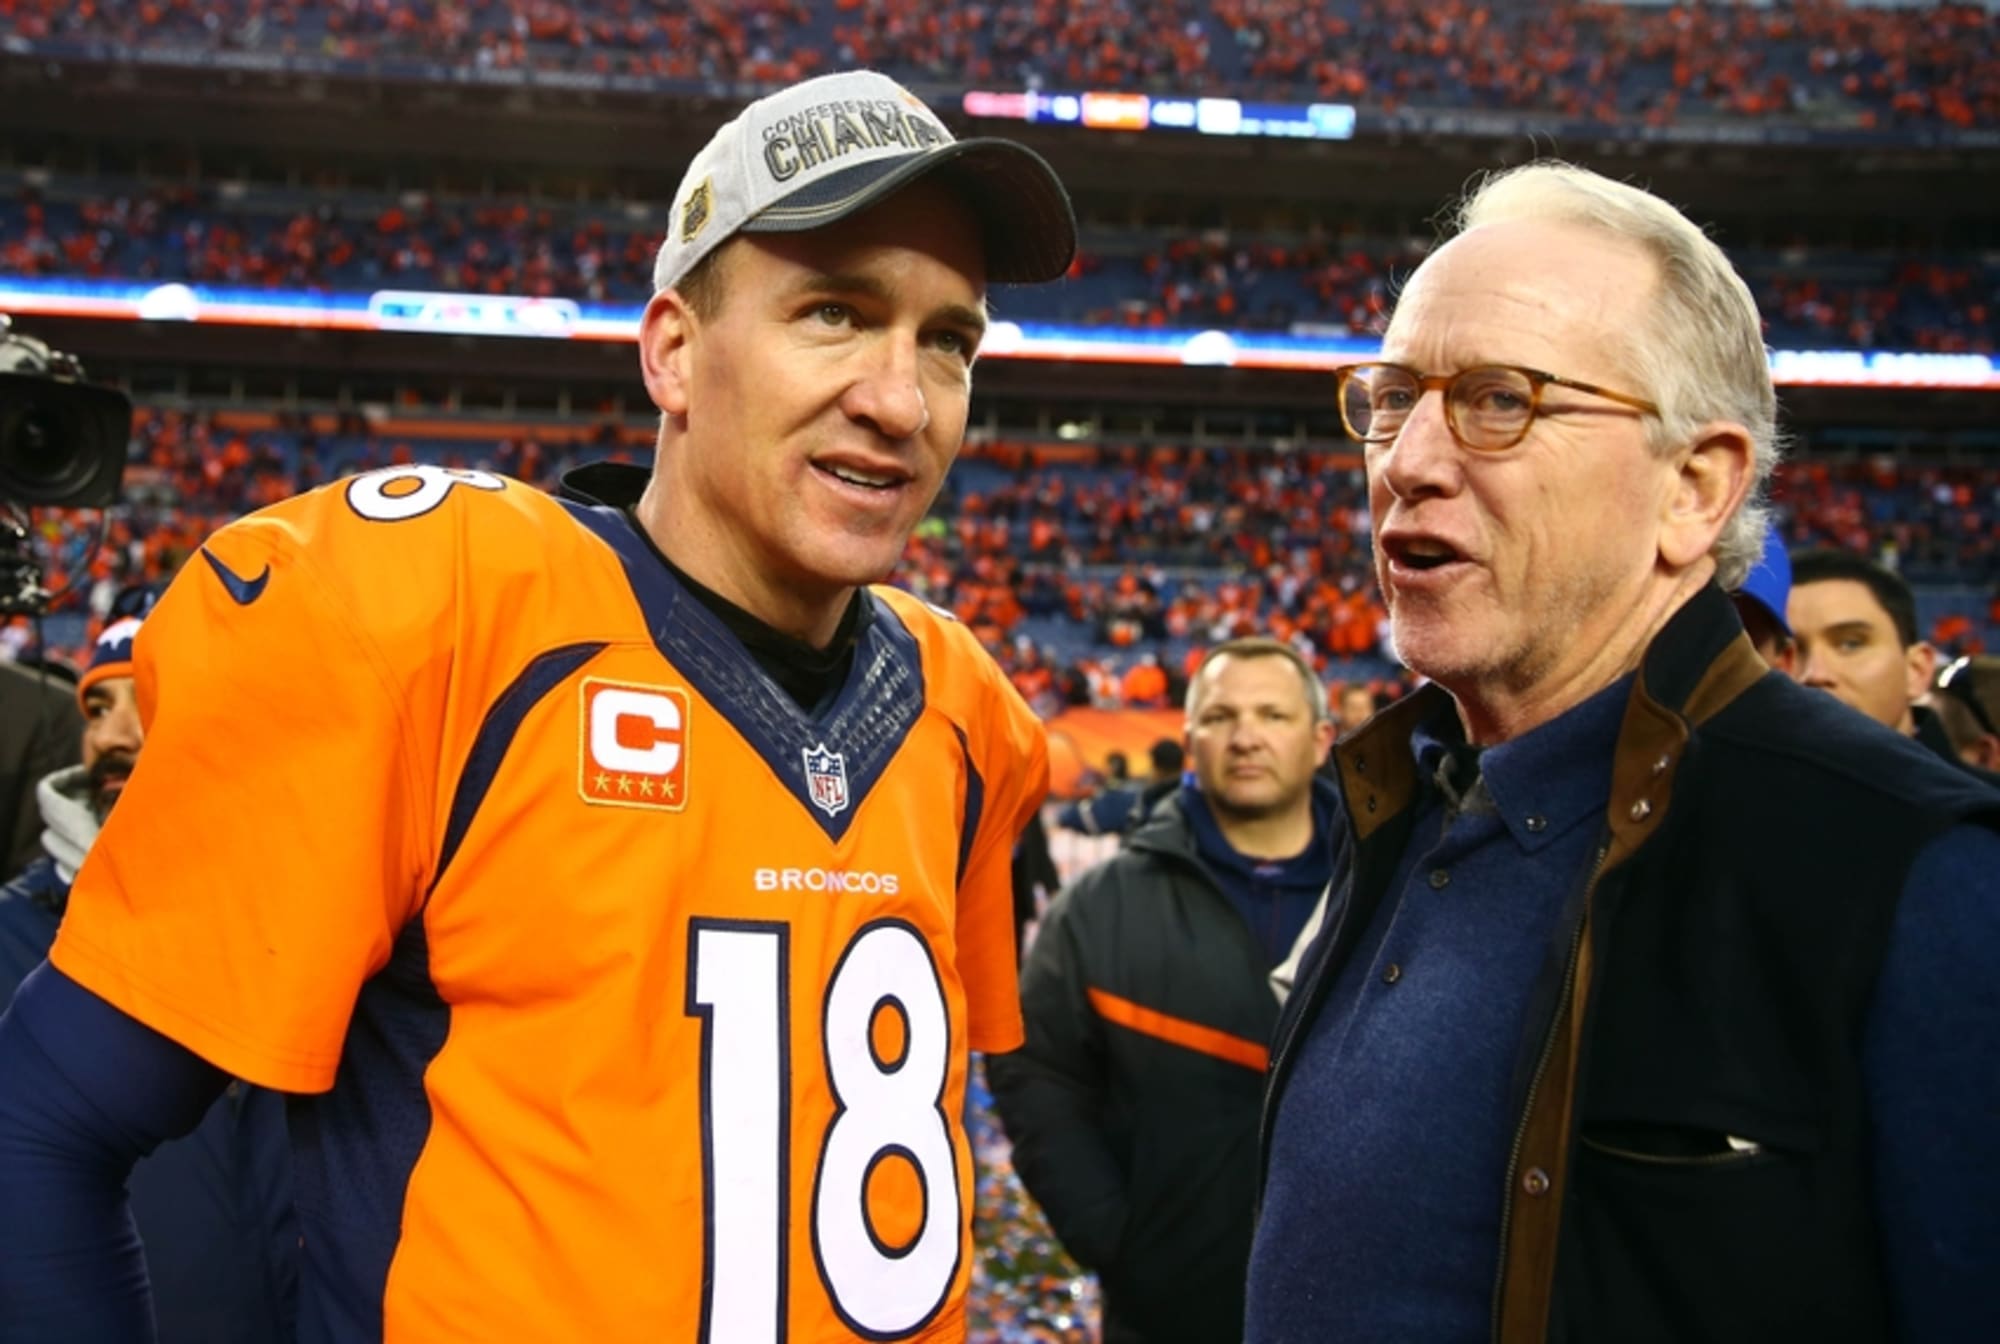 Peyton Manning's legacy doesn't change with Super Bowl 50 victory